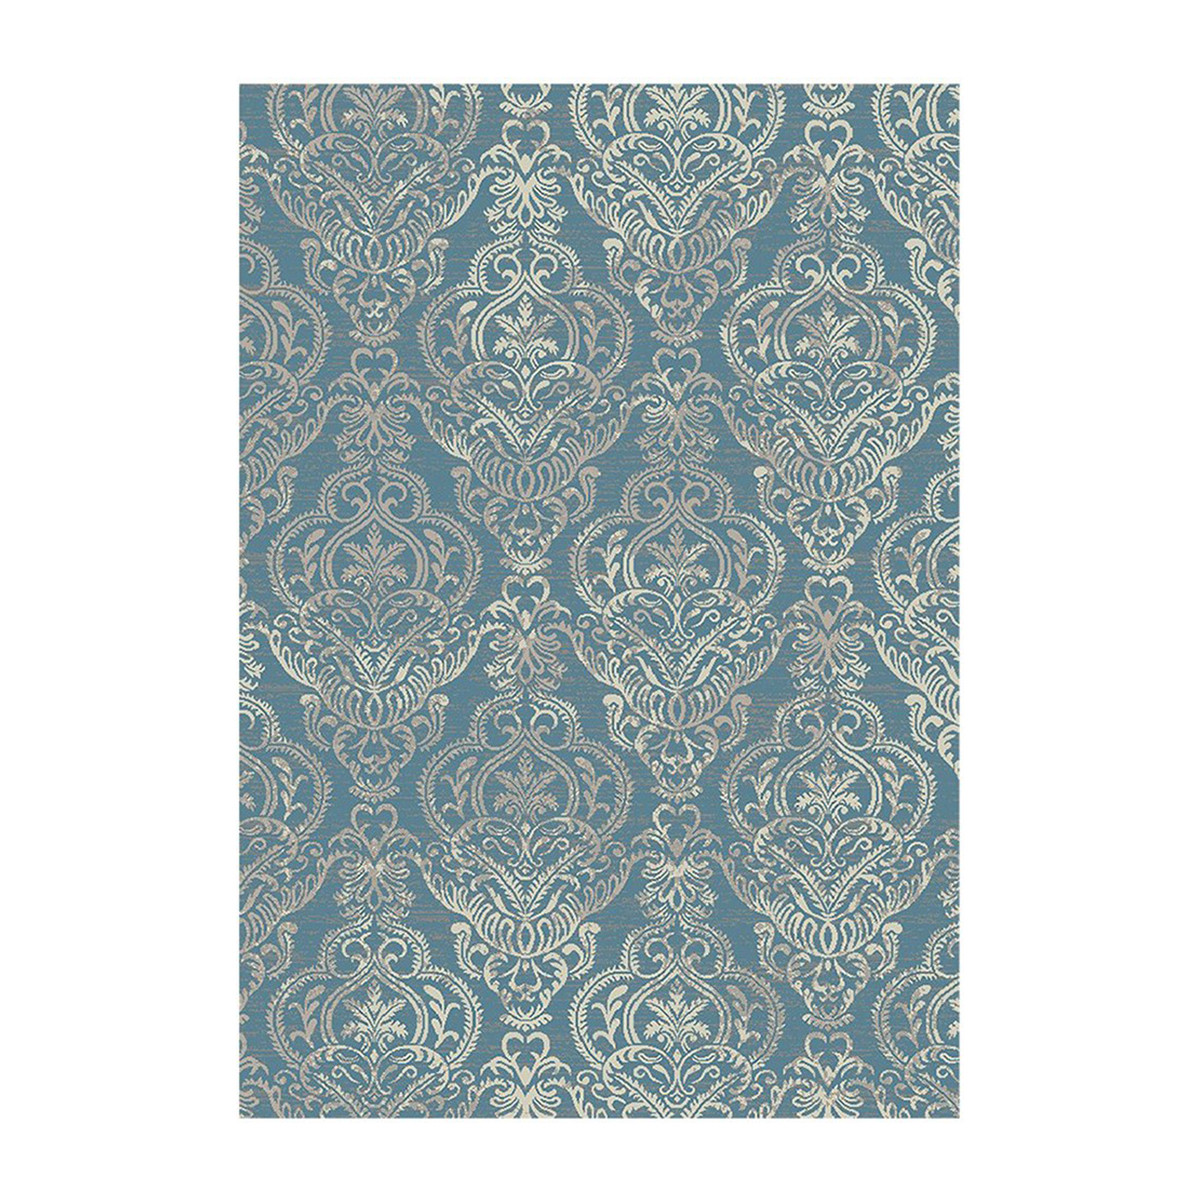 8' x 10' Blue and Beige Damask Distressed Area Rug-552167-1